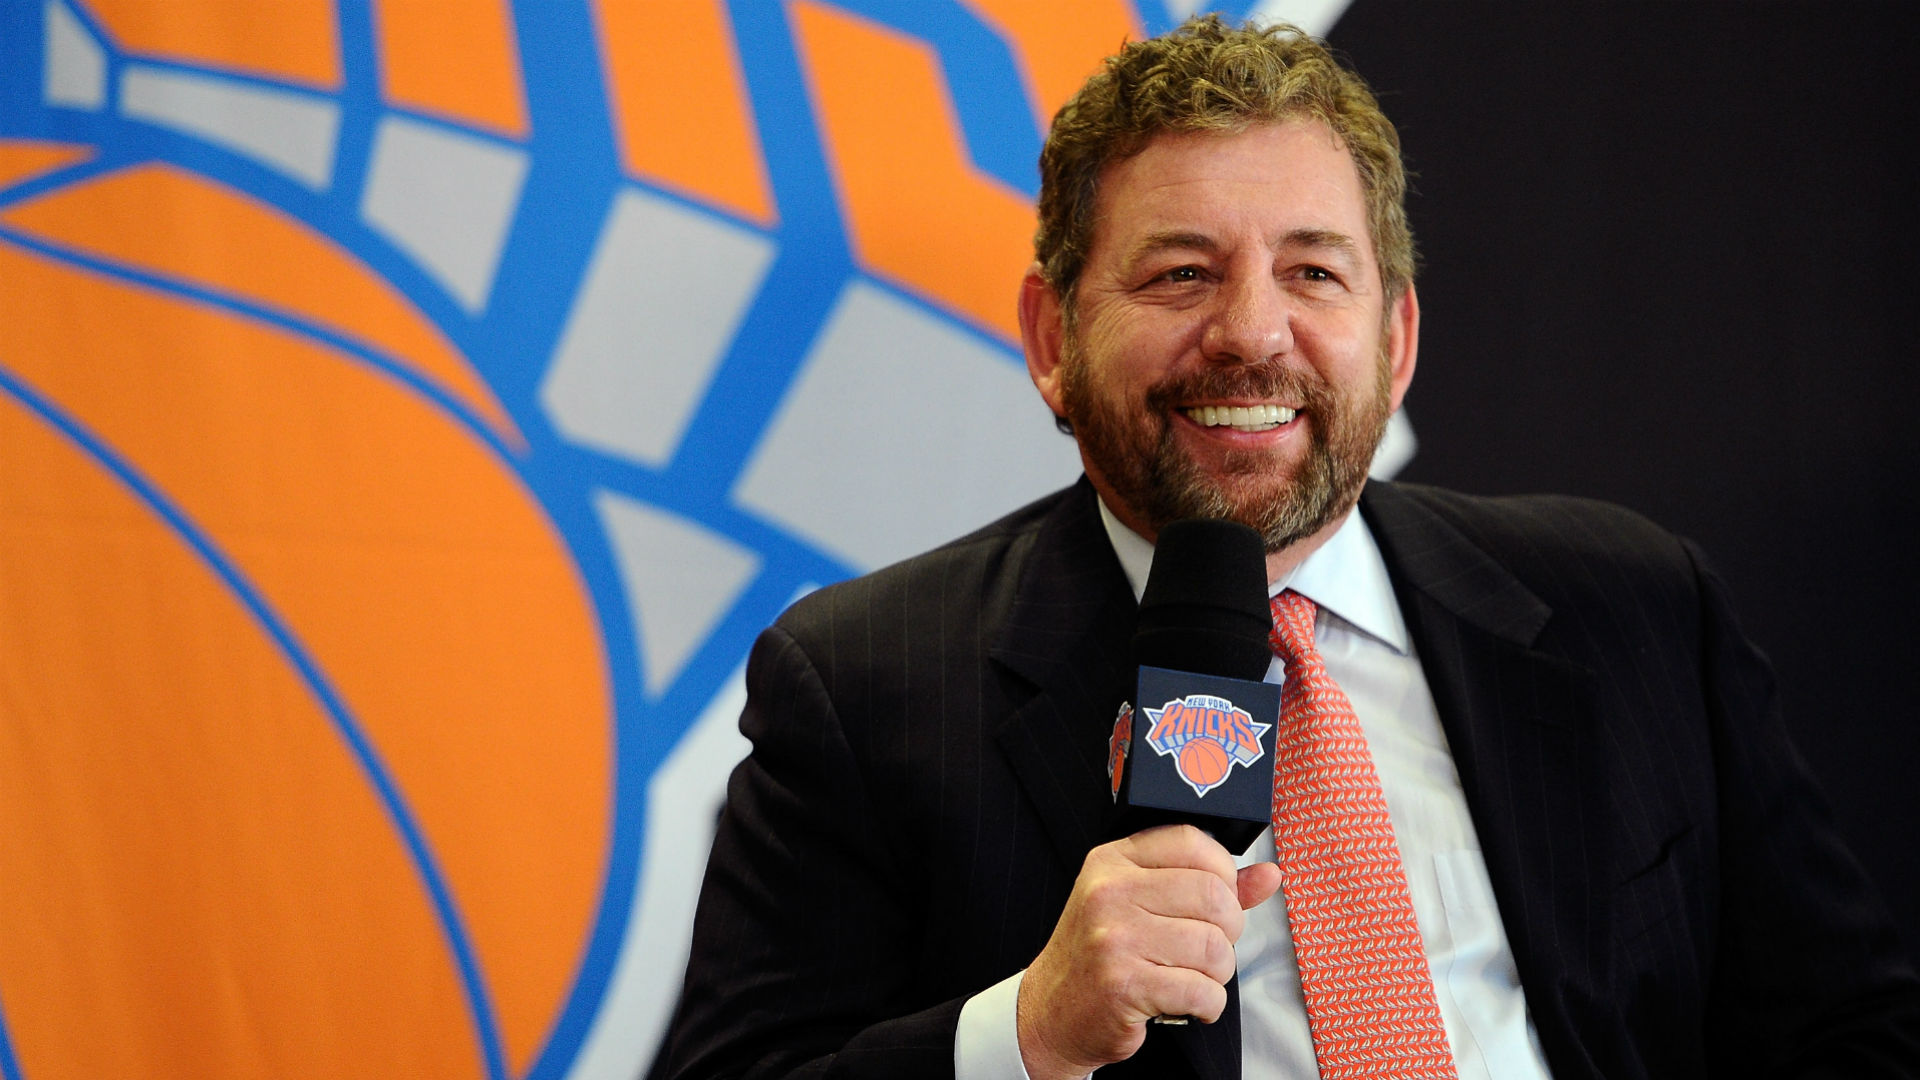 Knicks owner James Dolan interested in buying New York Daily News NBA